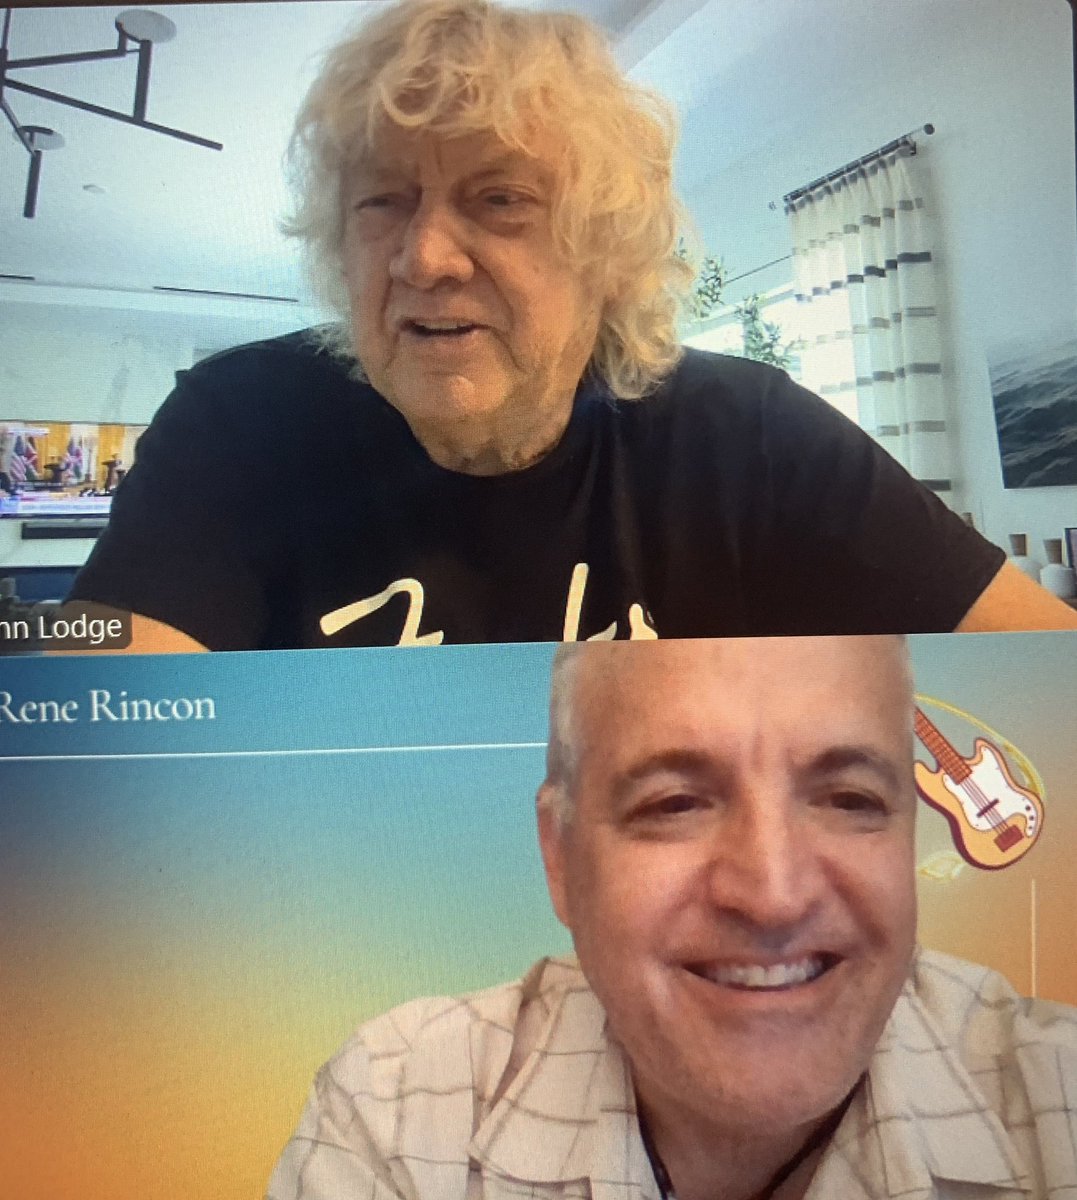 He’s just a legend (in a Rock and Roll Band) And I’m just a lucky guy Thank You Mr. @JohnLodgeMusic of The @MoodyBluesToday for such an awesome conversation- Looking forward to your show at the @keswicktheatre in Glenside, Pennsylvania -